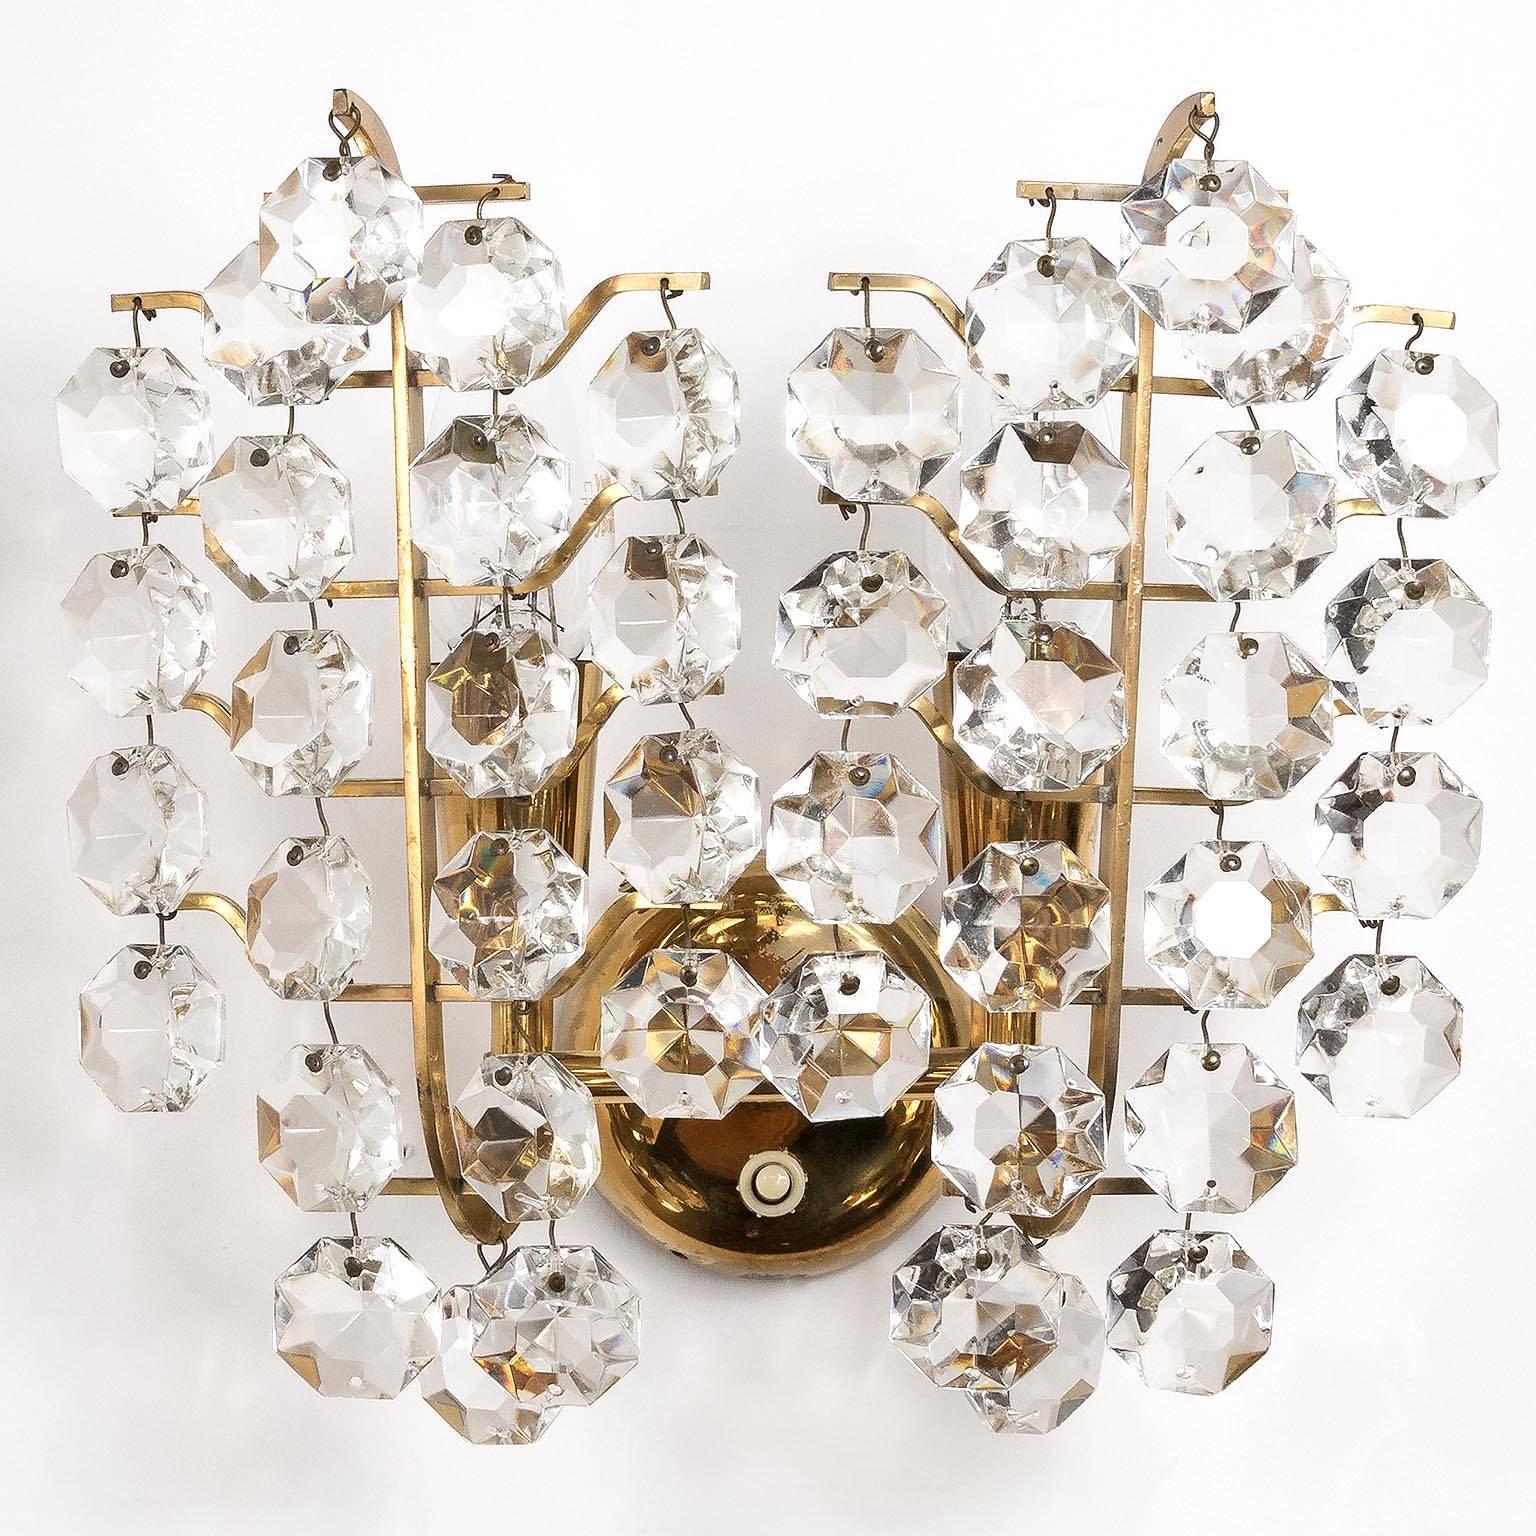 A pair of high quality and handmade wall lights by Bakalowits & Söhne Vienna, Austria, manufactured in midcentury, circa 1960 (late 1950s or early 1960s). 
A brass frame with lovely patina is decorated with diamond shaped crystal glass pieces. Very